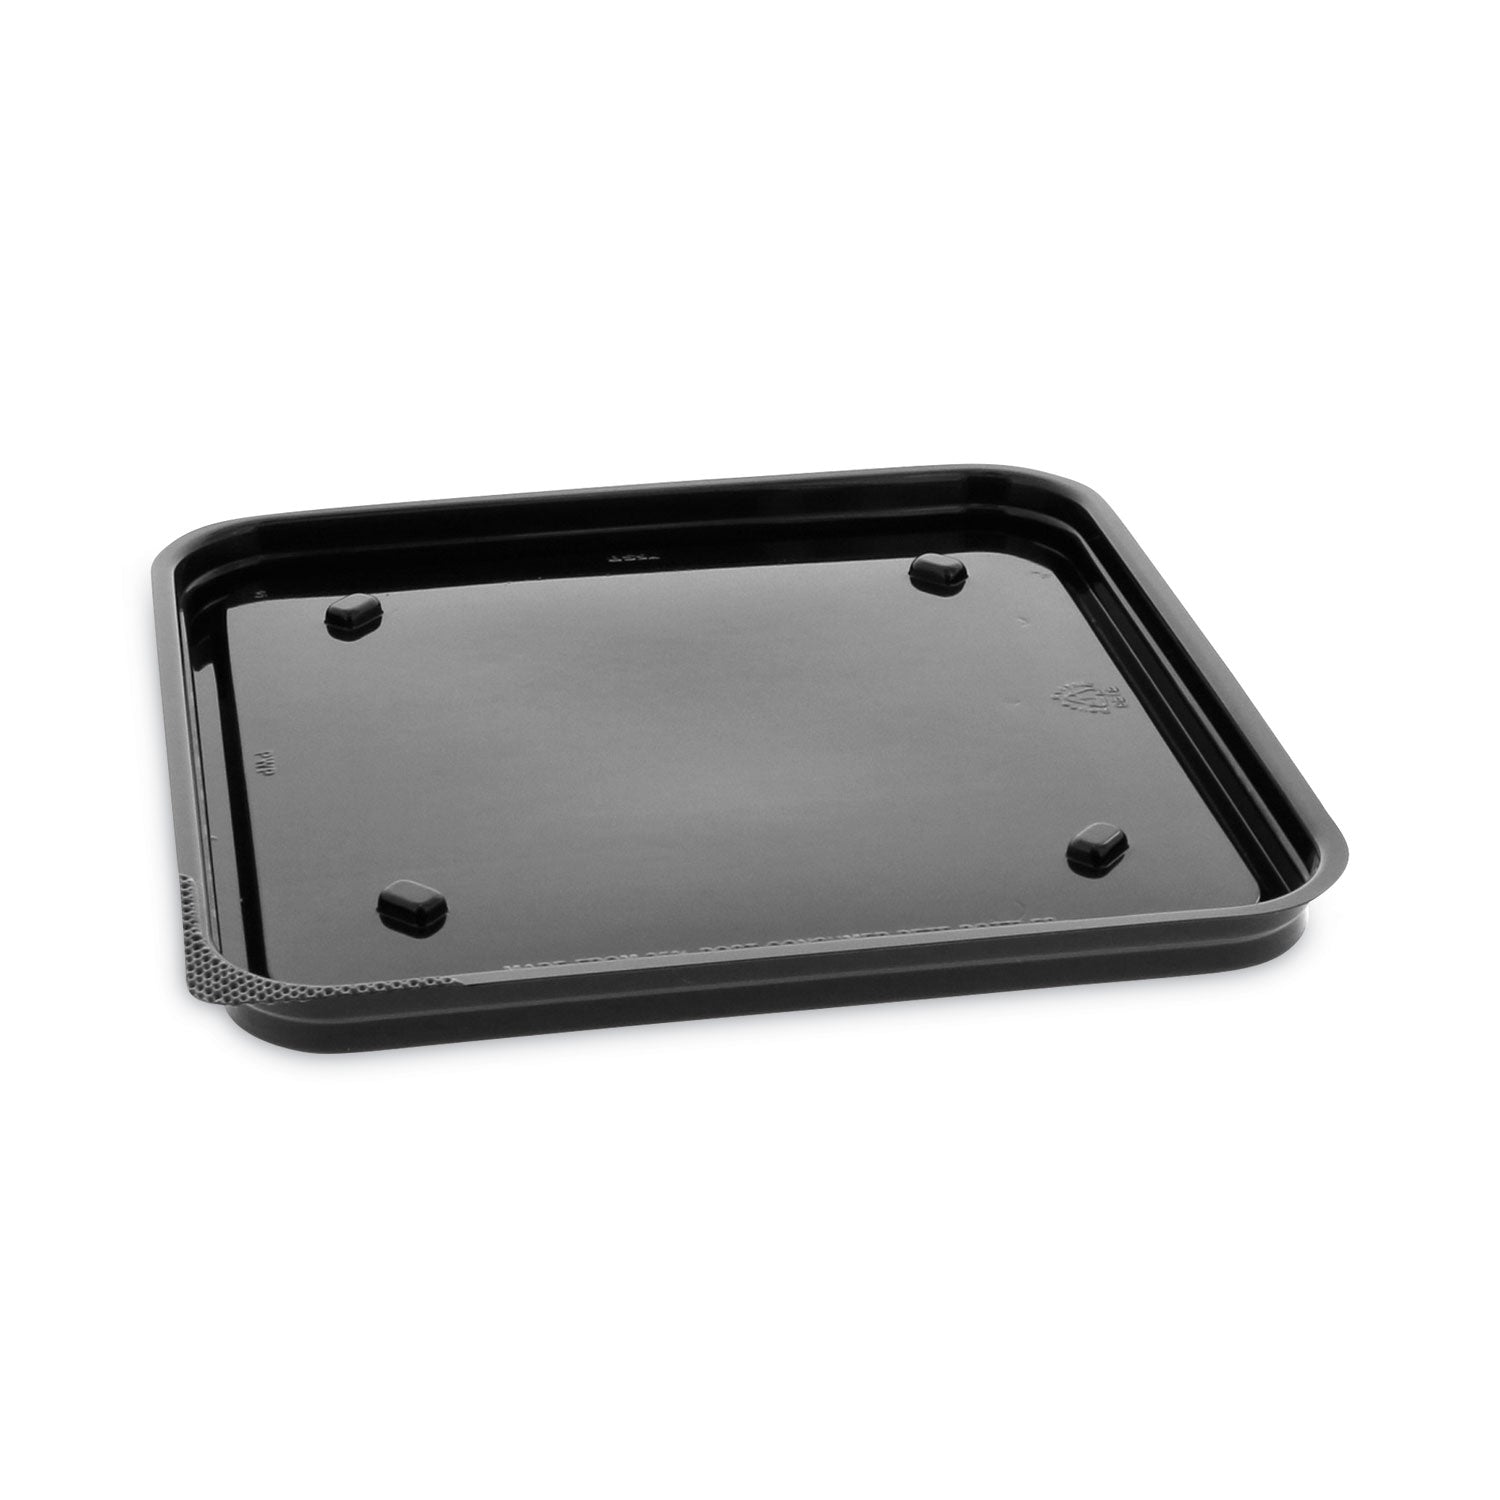 recycled-plastic-container-6-x-6-brownie-container-75-x-75-x-056-black-plastic-195-carton_pct75sbase - 1